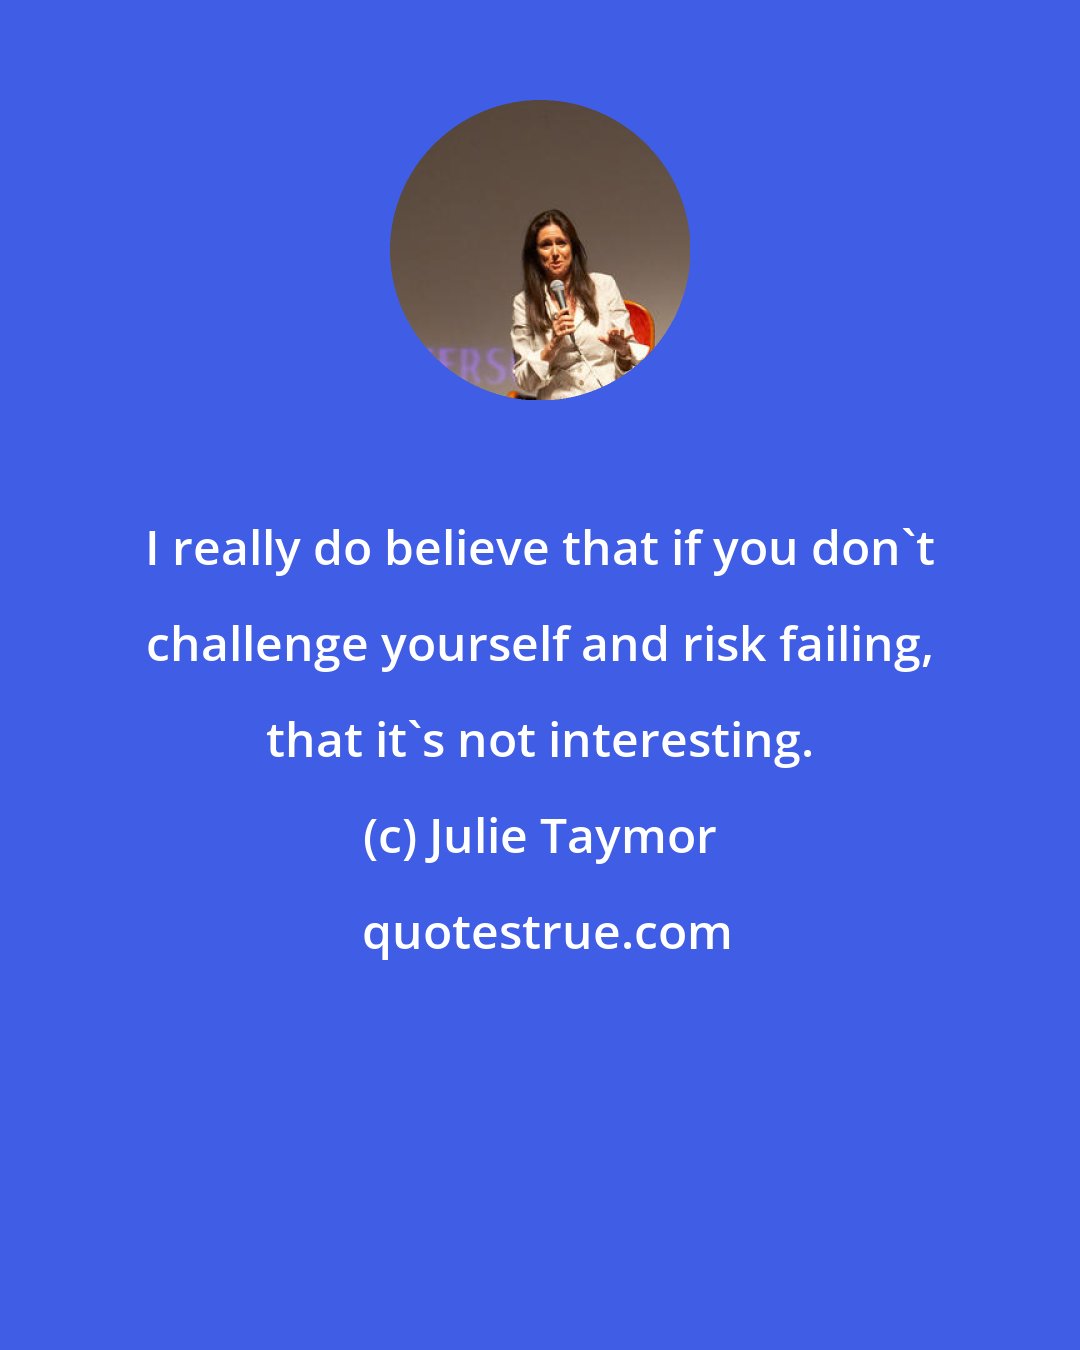 Julie Taymor: I really do believe that if you don't challenge yourself and risk failing, that it's not interesting.